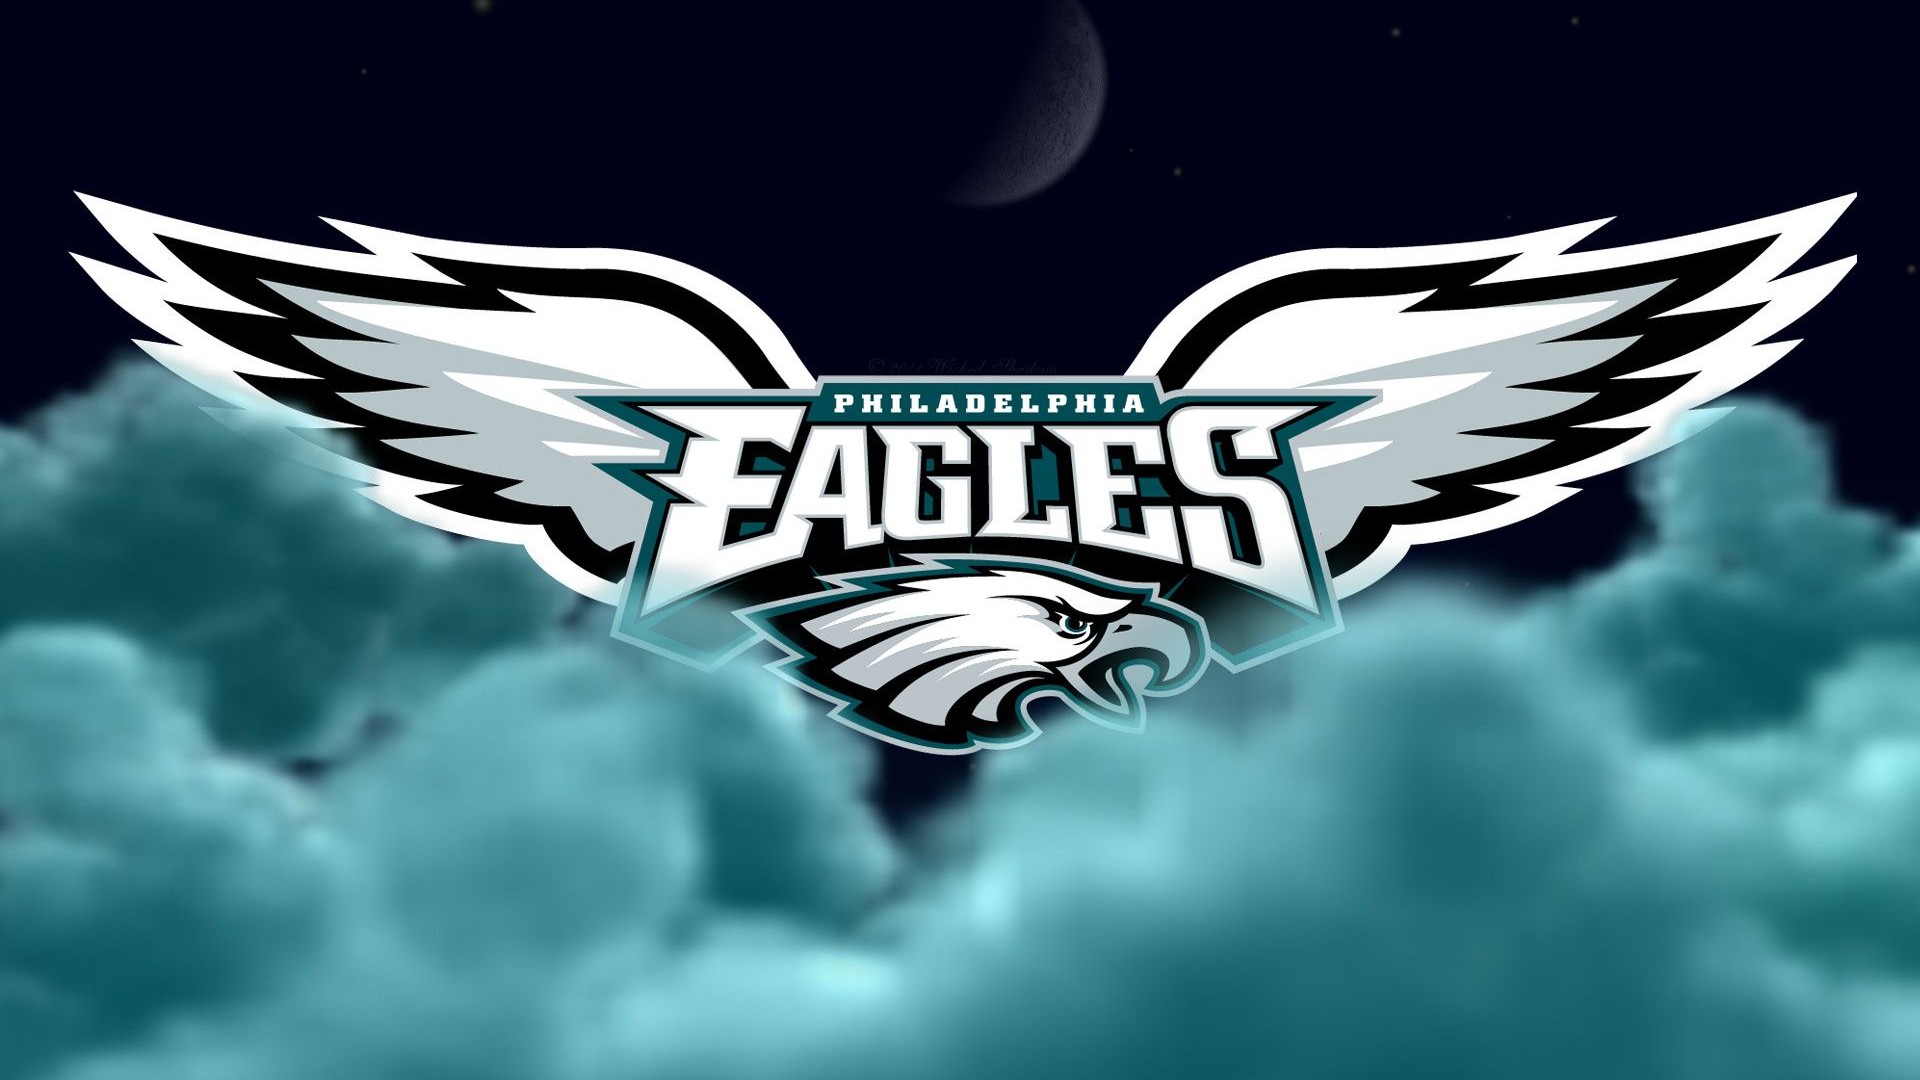 Wallpapers HD Eagles with resolution 1920x1080 pixel. You can make this wallpaper for your Mac or Windows Desktop Background, iPhone, Android or Tablet and another Smartphone device